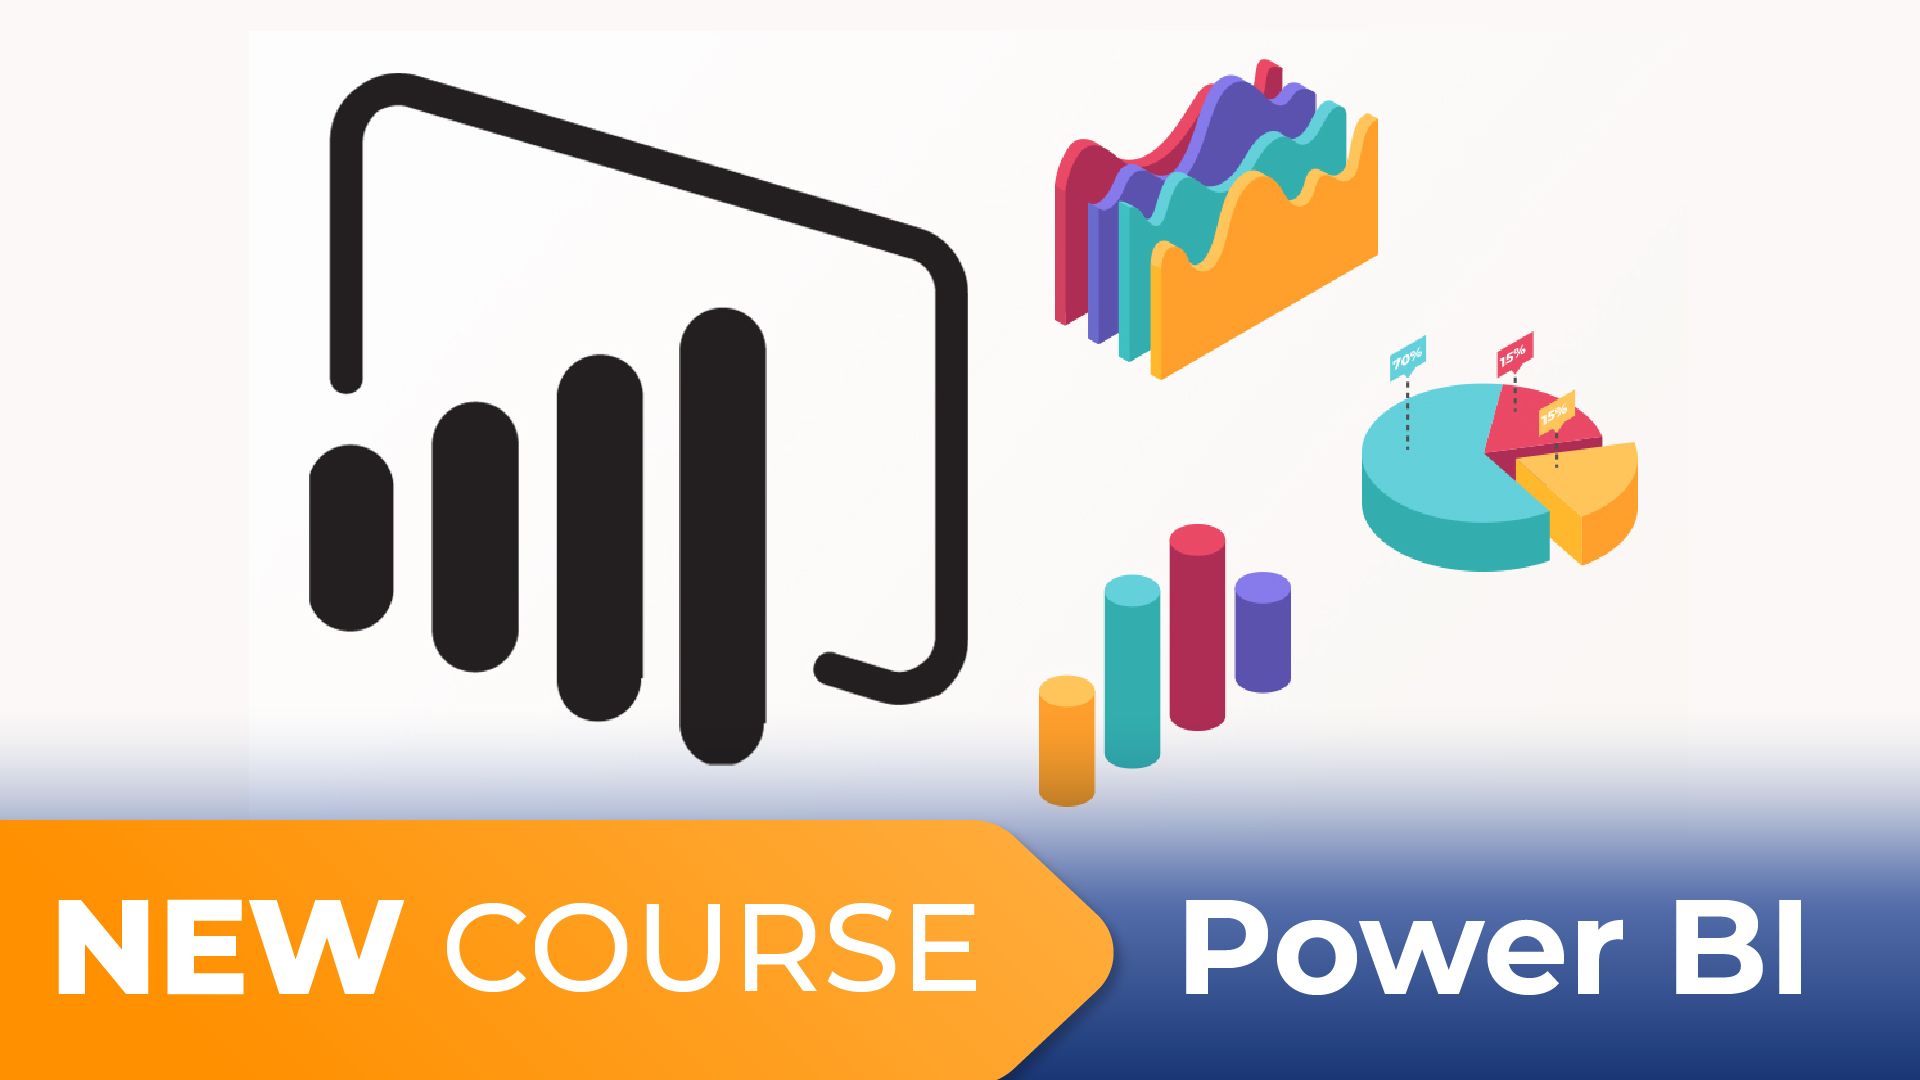 The 365 Power BI Course Is Live